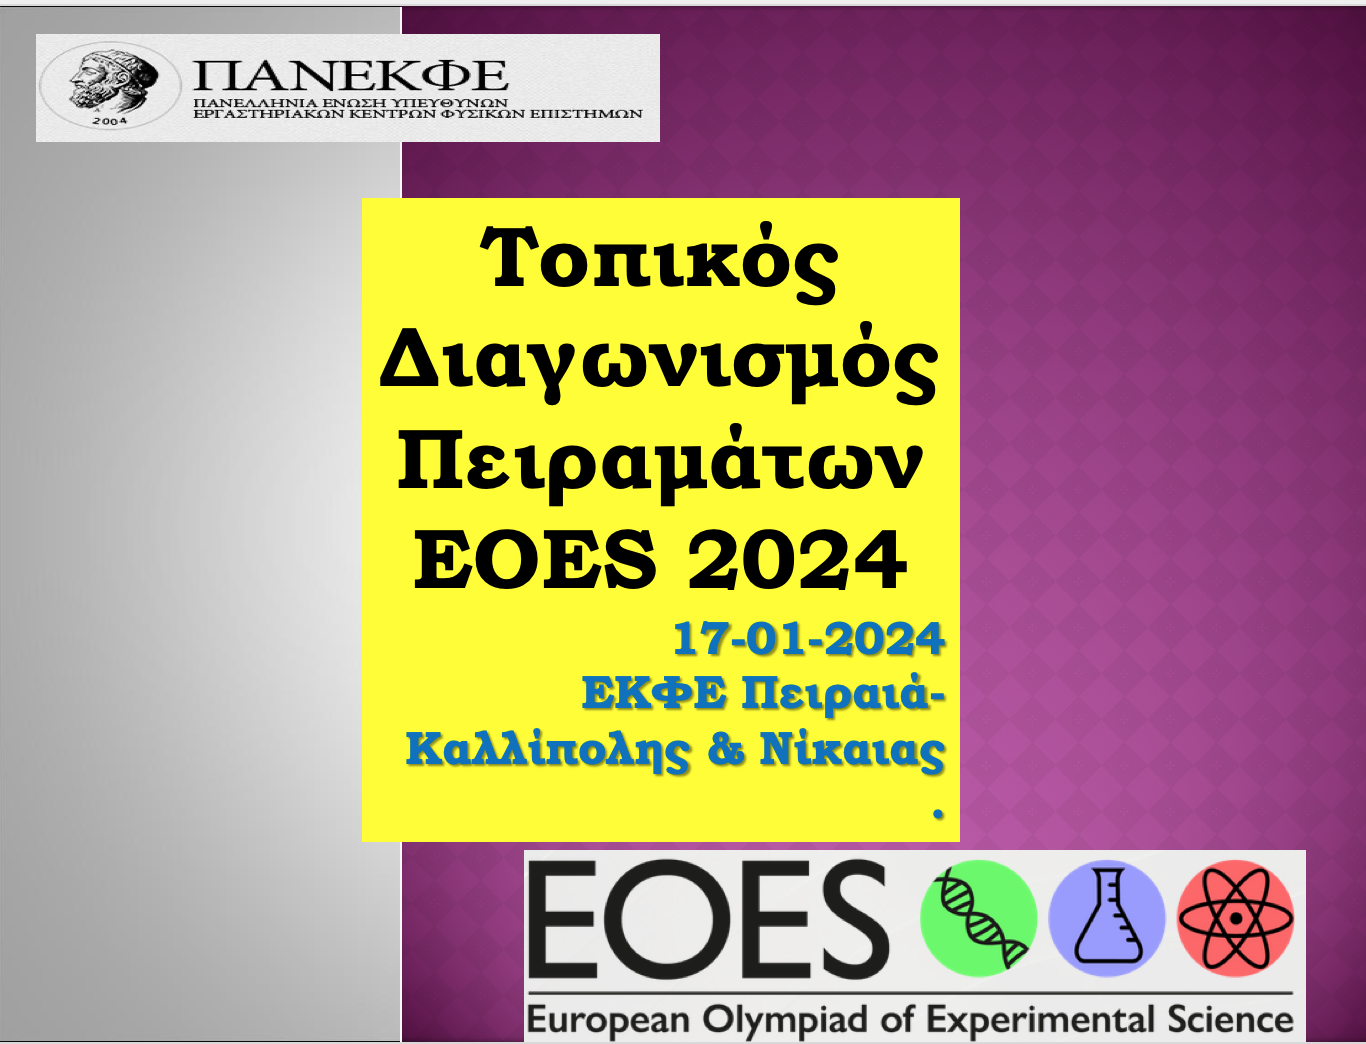 EOES 2024